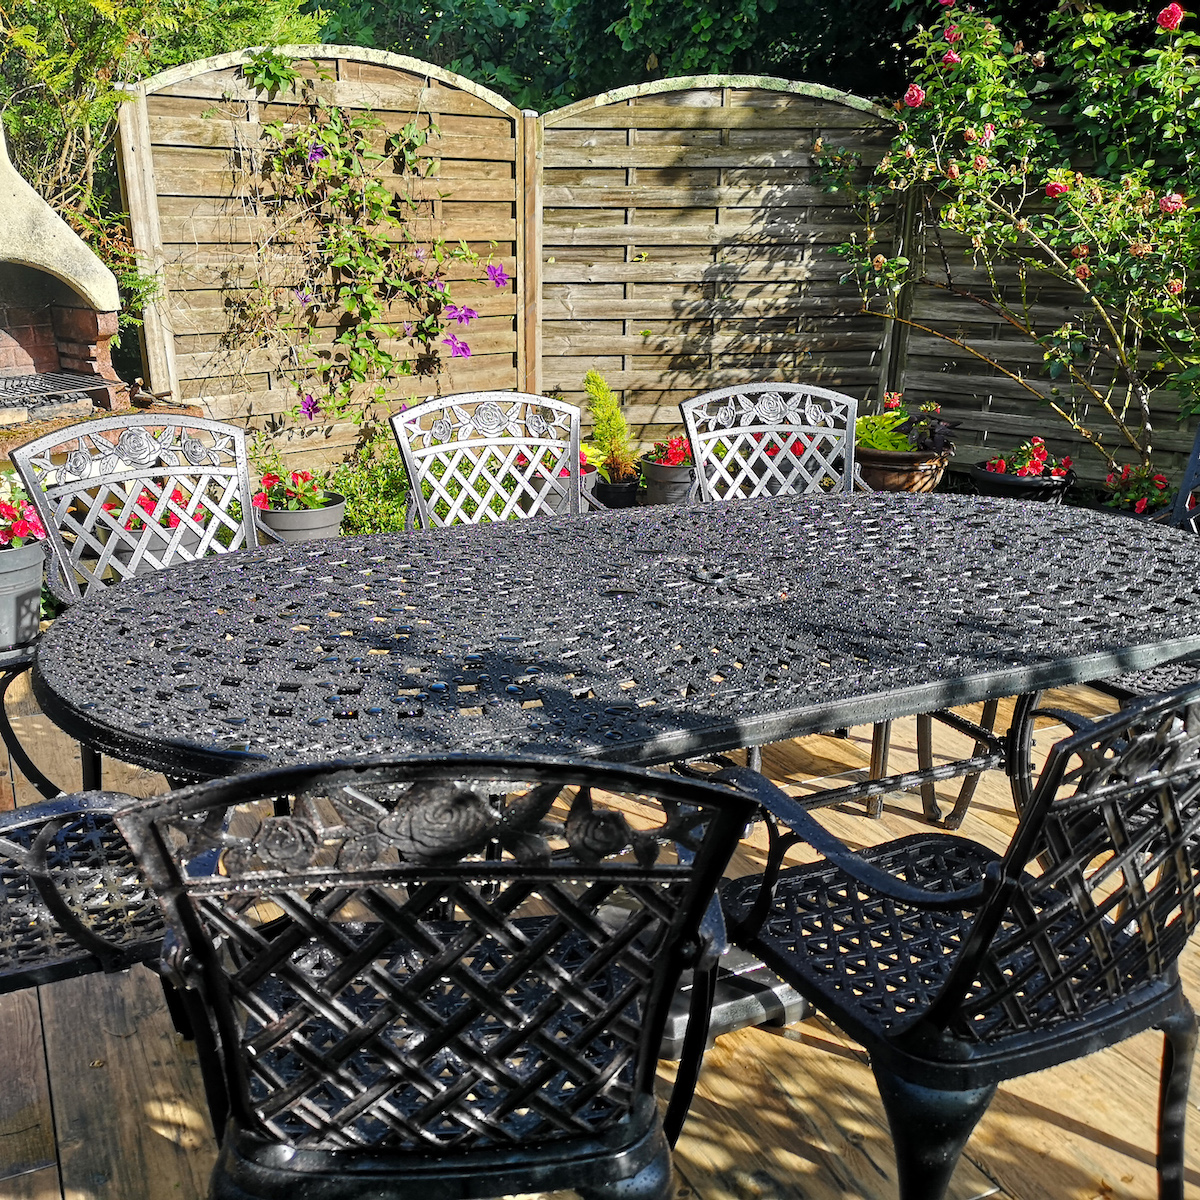 Why store your garden furniture?